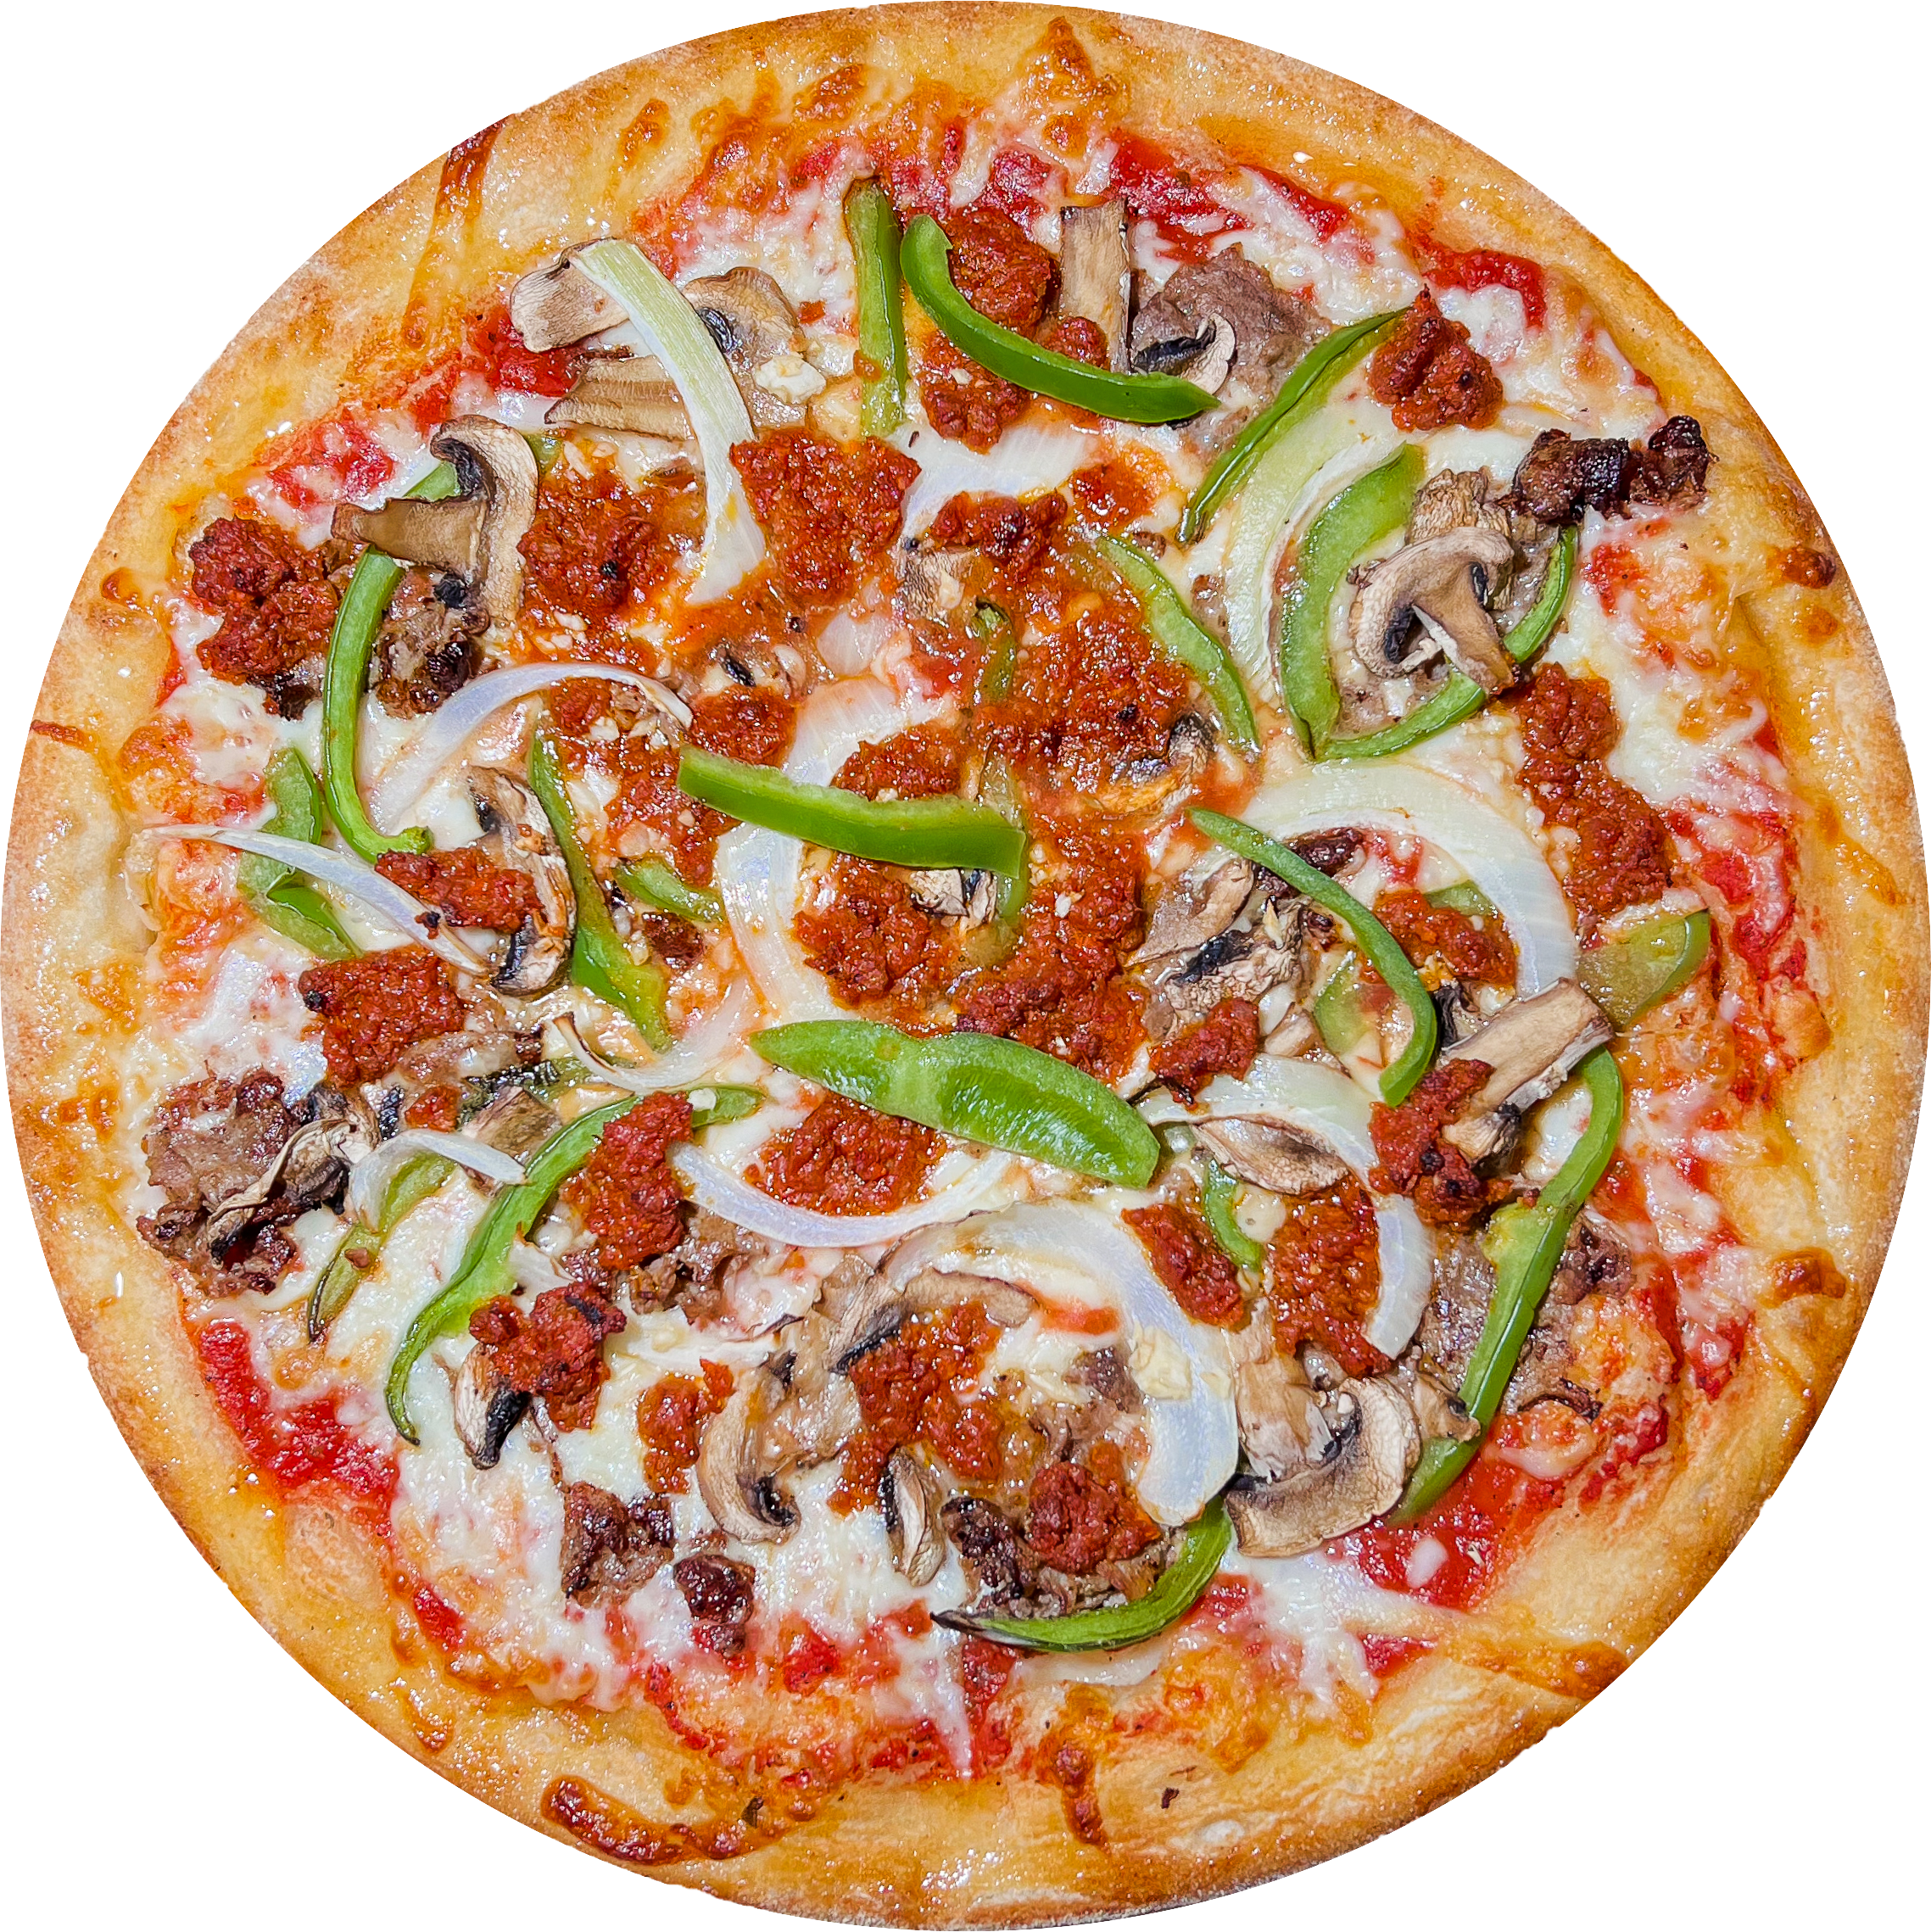 Nico's Pizza Special S $18.95 L $22.95 XL $25.95